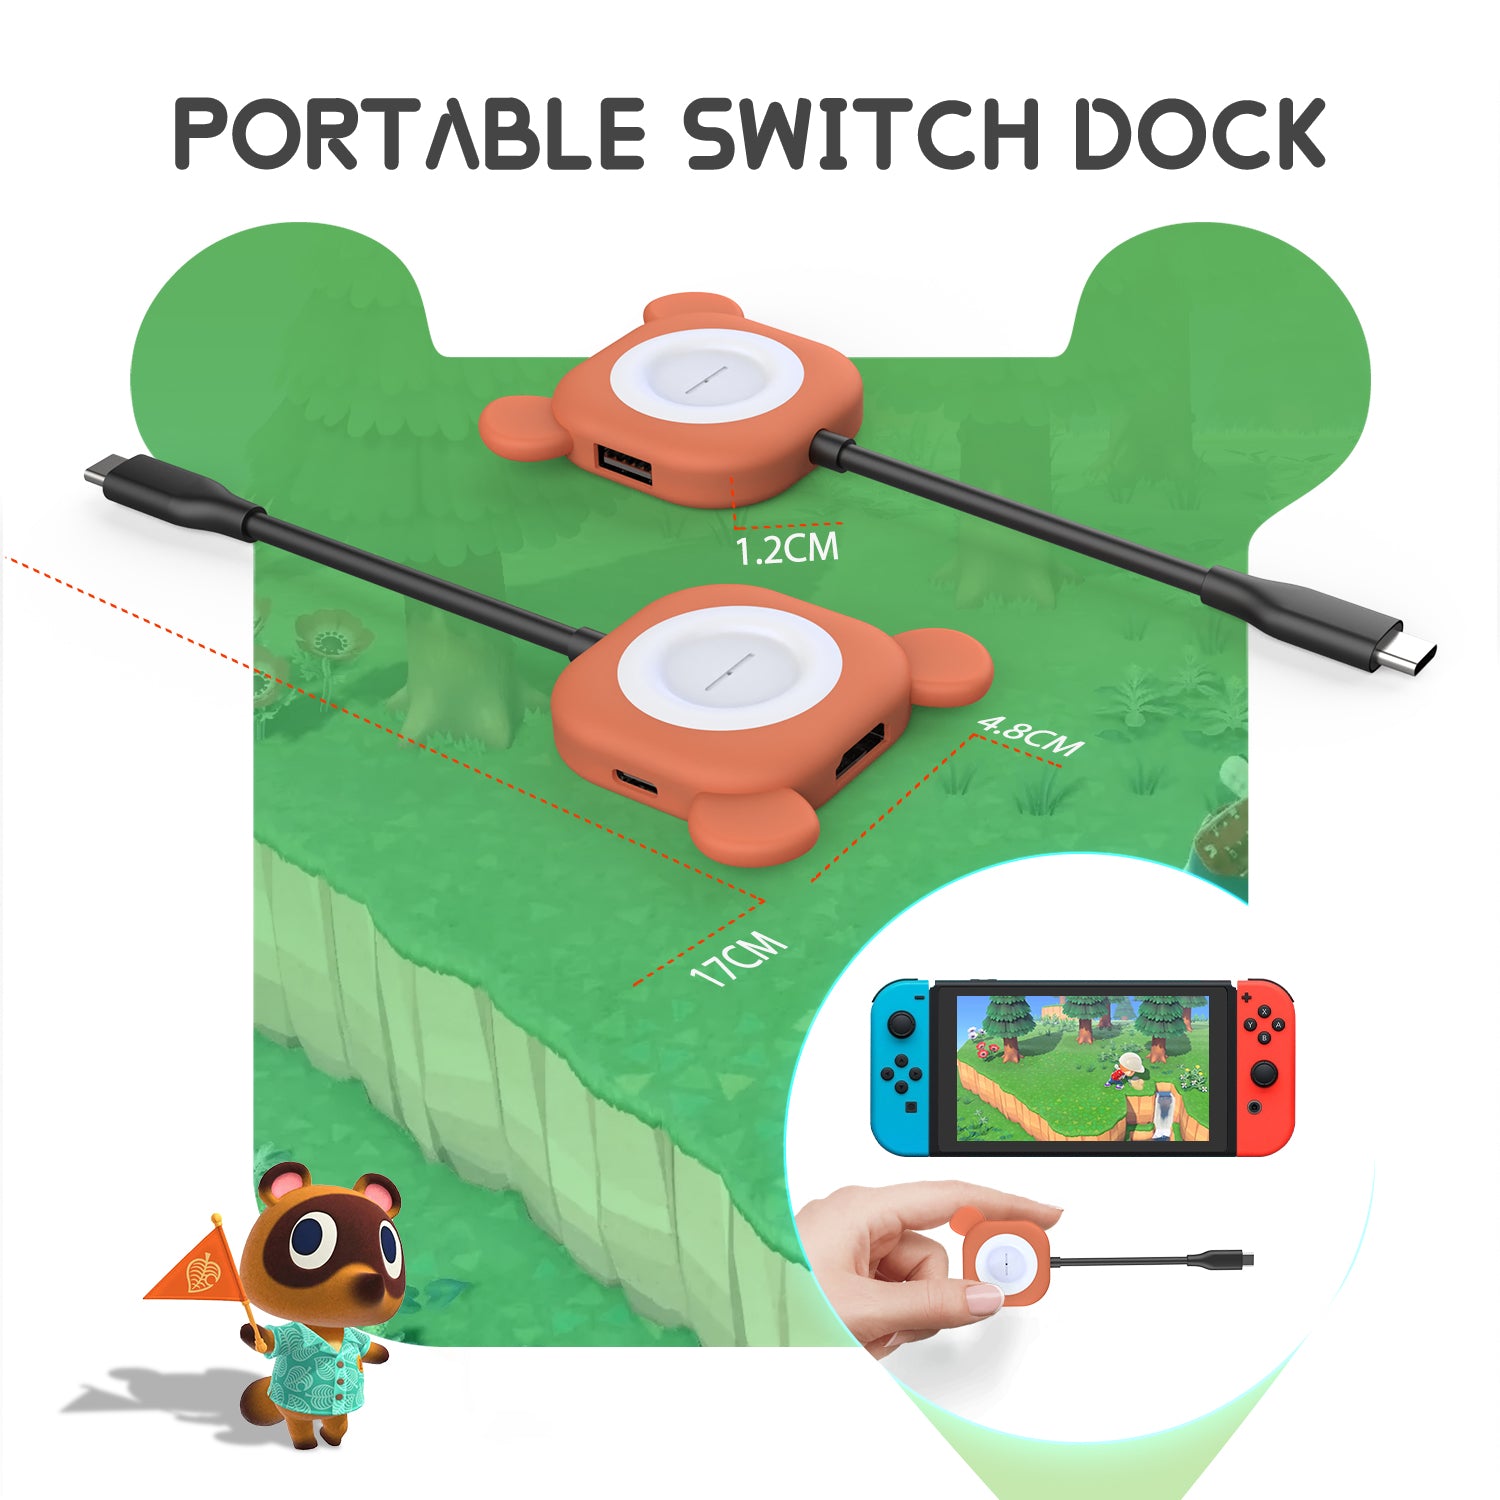 MANBA Portable Switch Dock for Switch/OLED